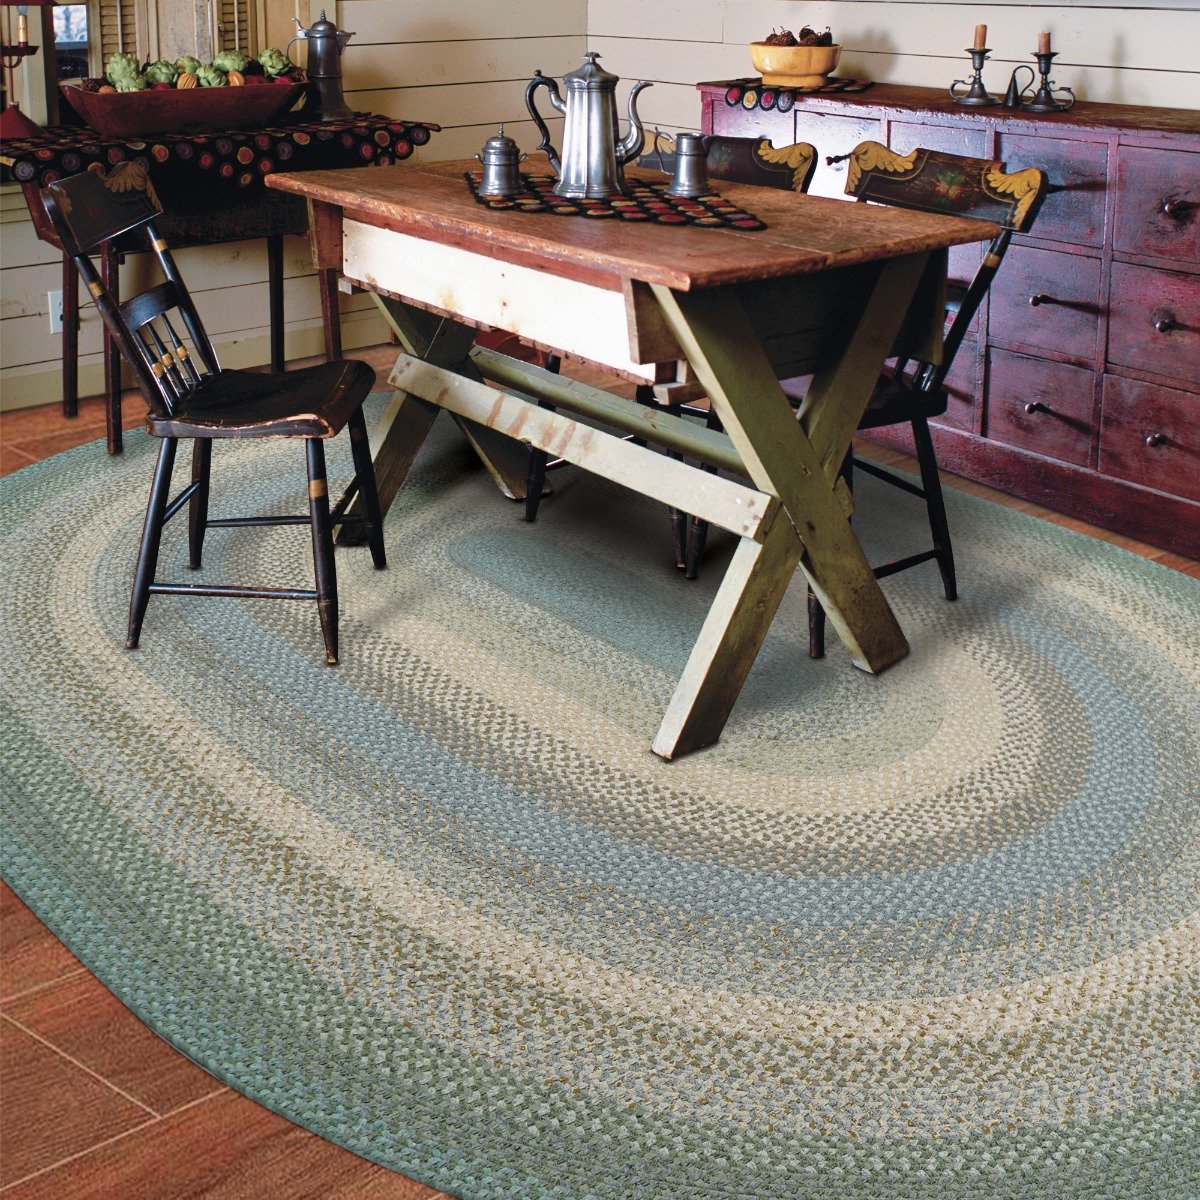 Biscotti Cotton Braided Rug  Country Primitive Braided Rug by